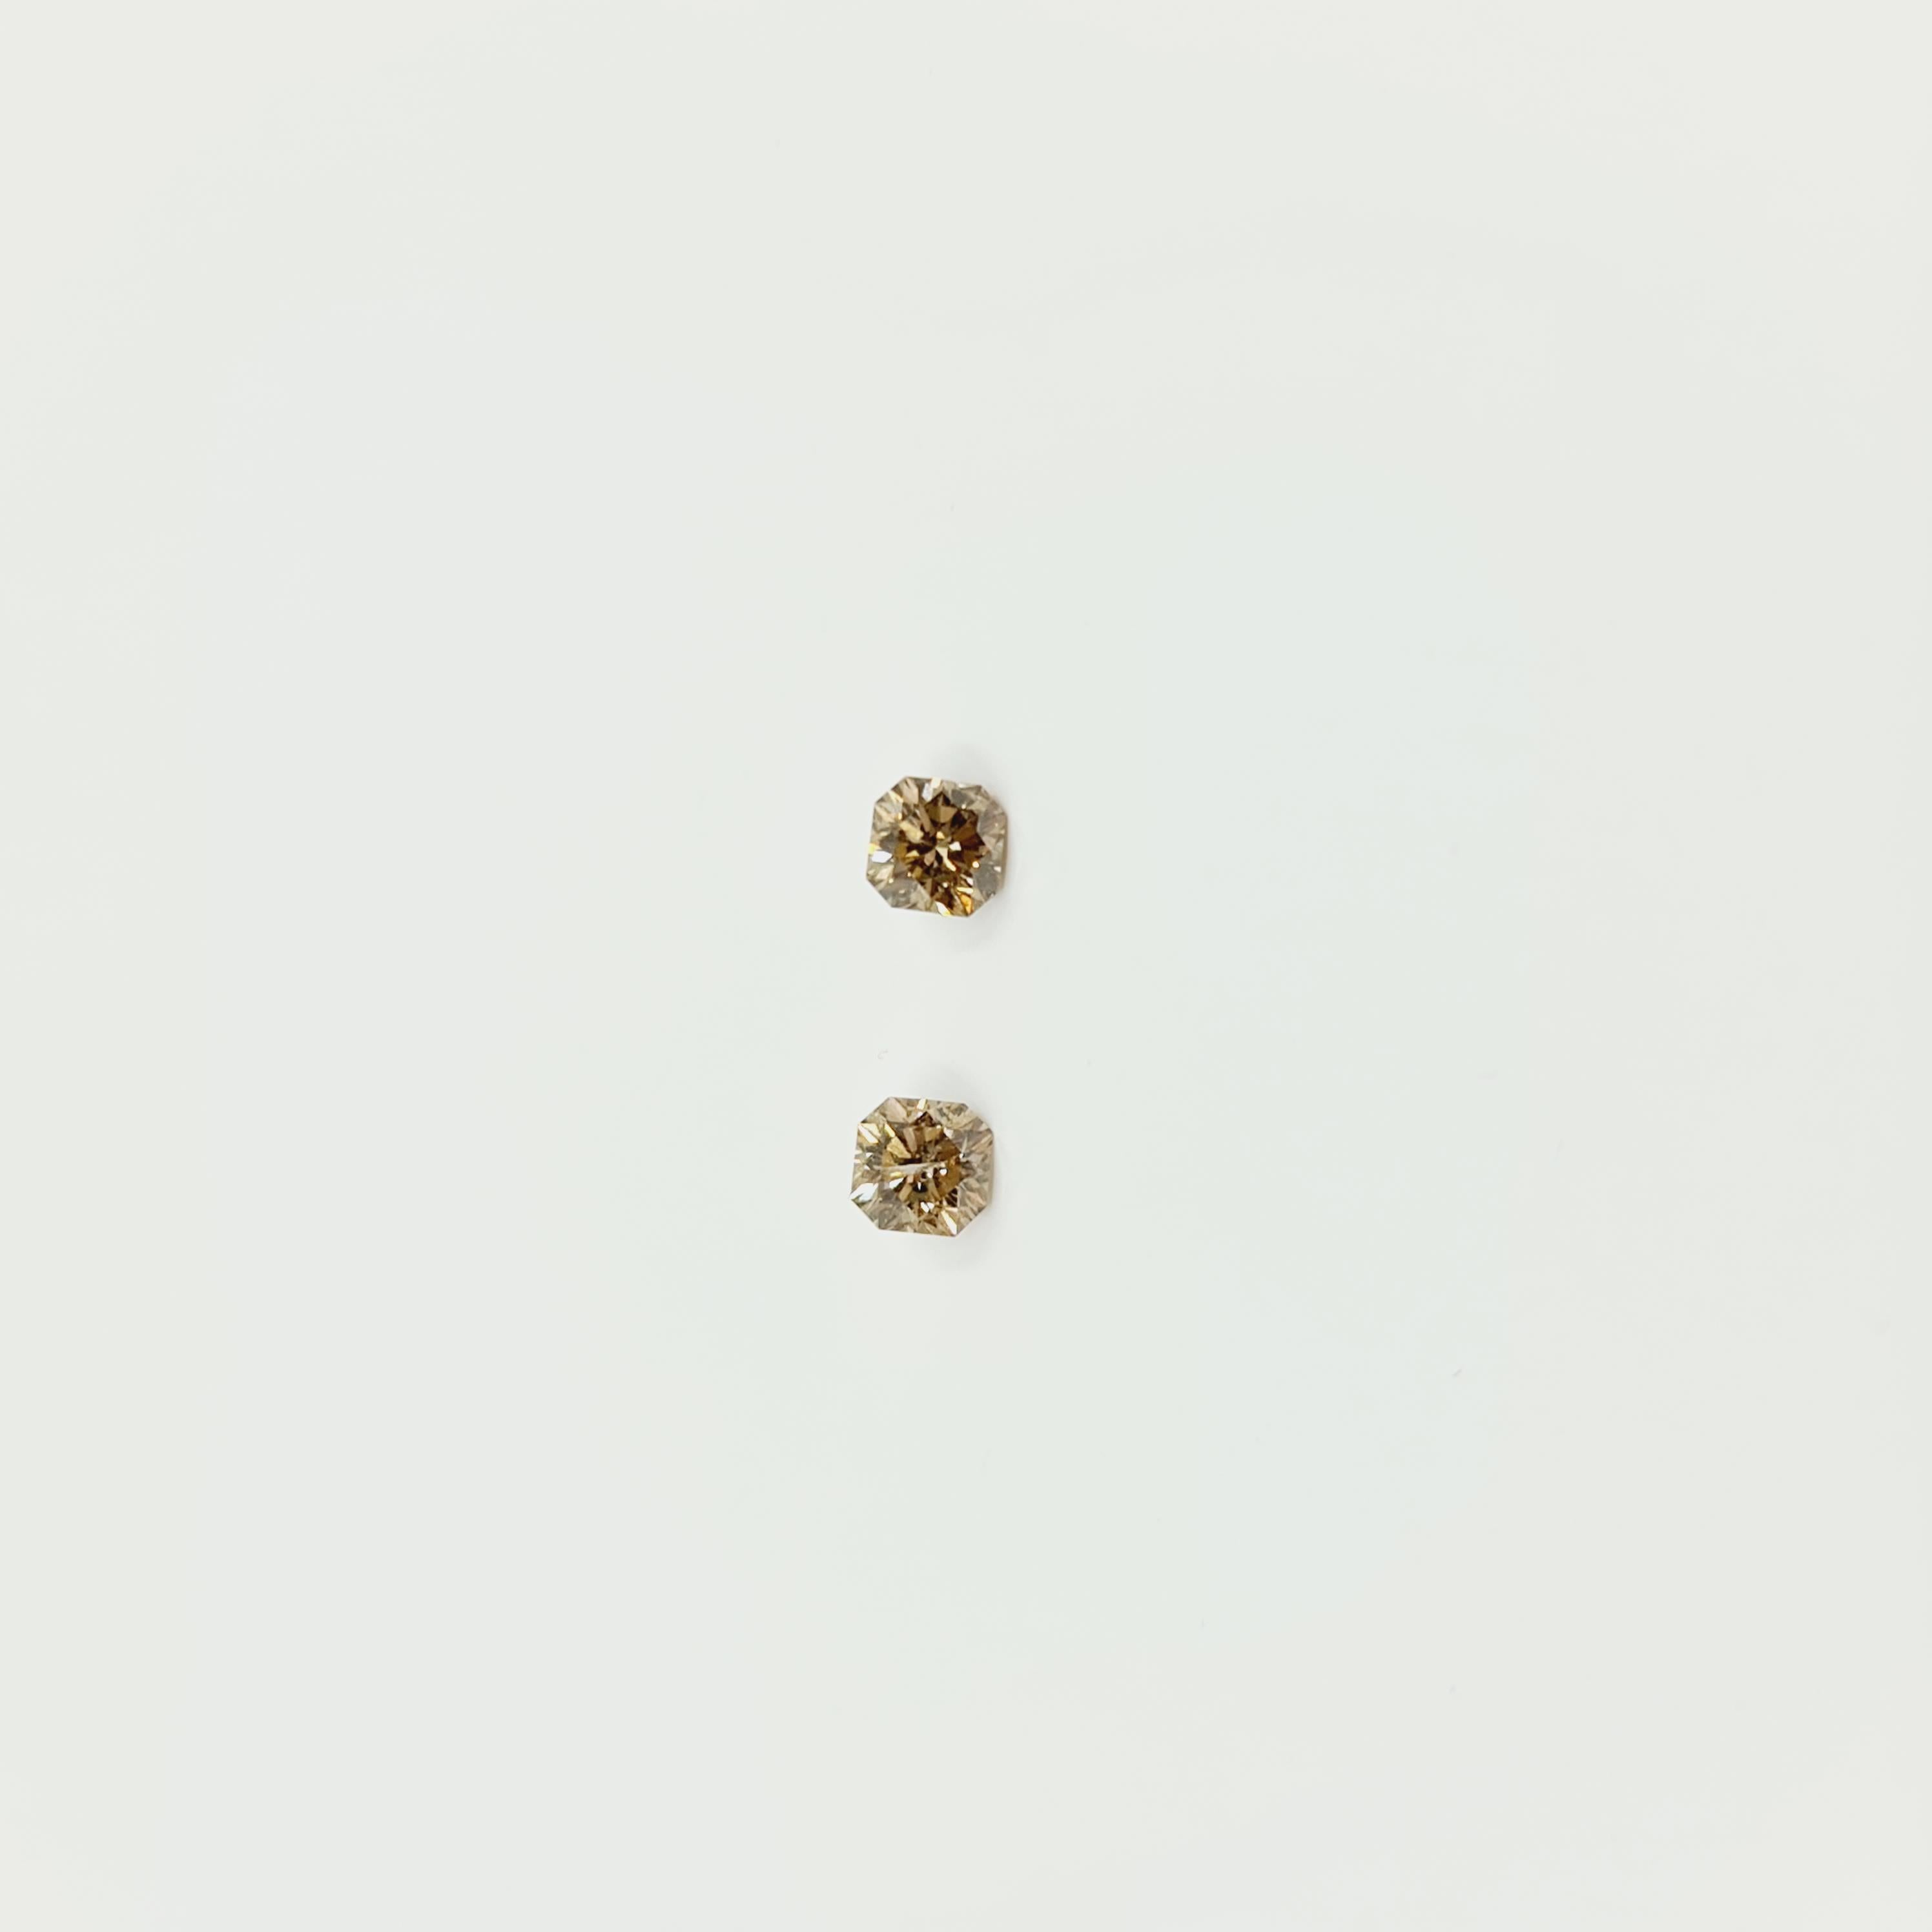 GIA Certified Solitaire Fancy Cognac Diamond Studs 0.45 Carat I2 0.46 Carat I1.
750 Whitegold Solitaire Earrings with Fancy Flanders Cut Diamonds.  
High Gloss Polished.   

Flanders Cut
Also called 